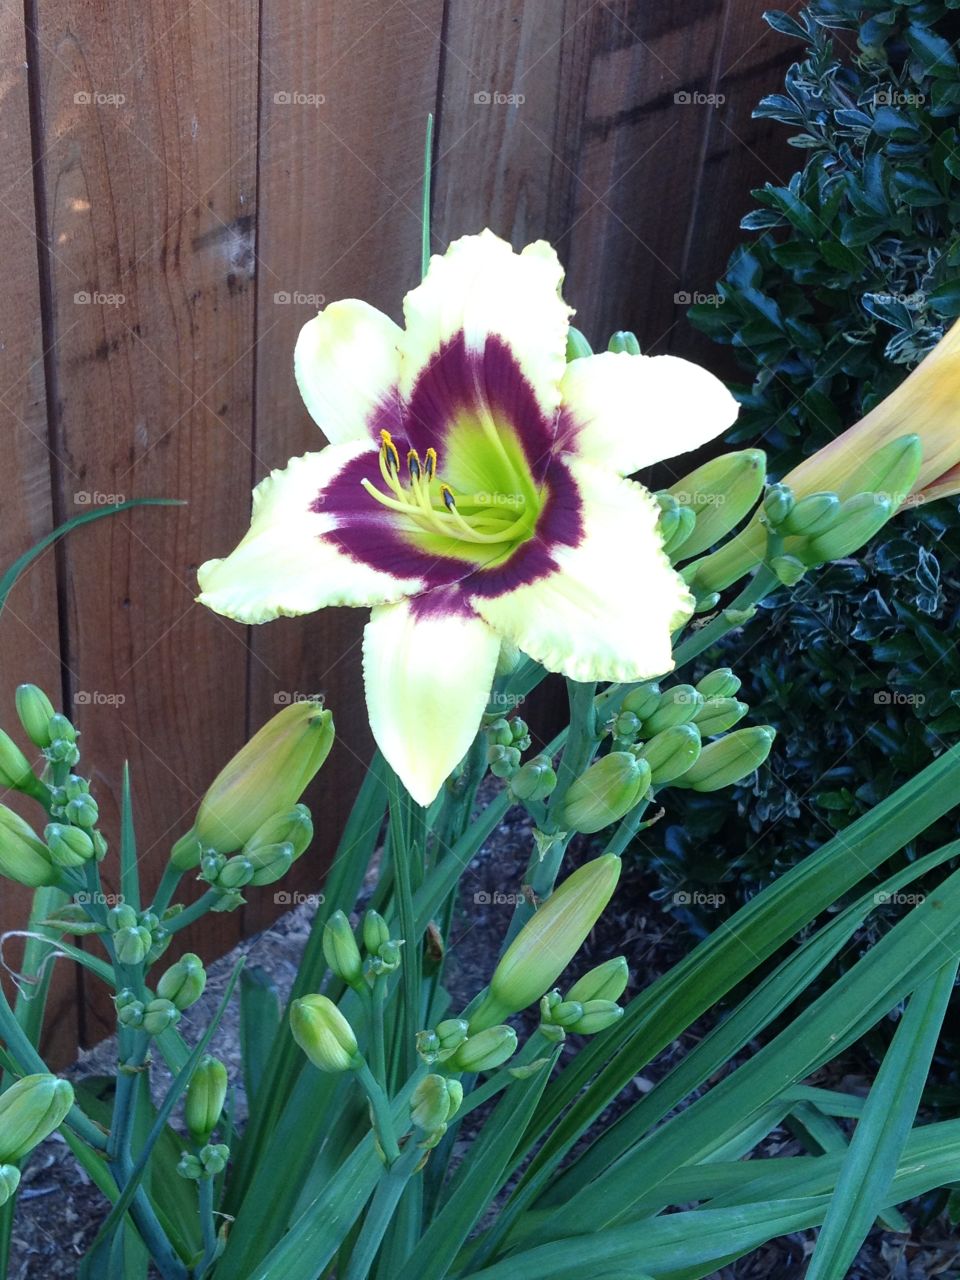 Day Lilly splendor in the flowerbed 